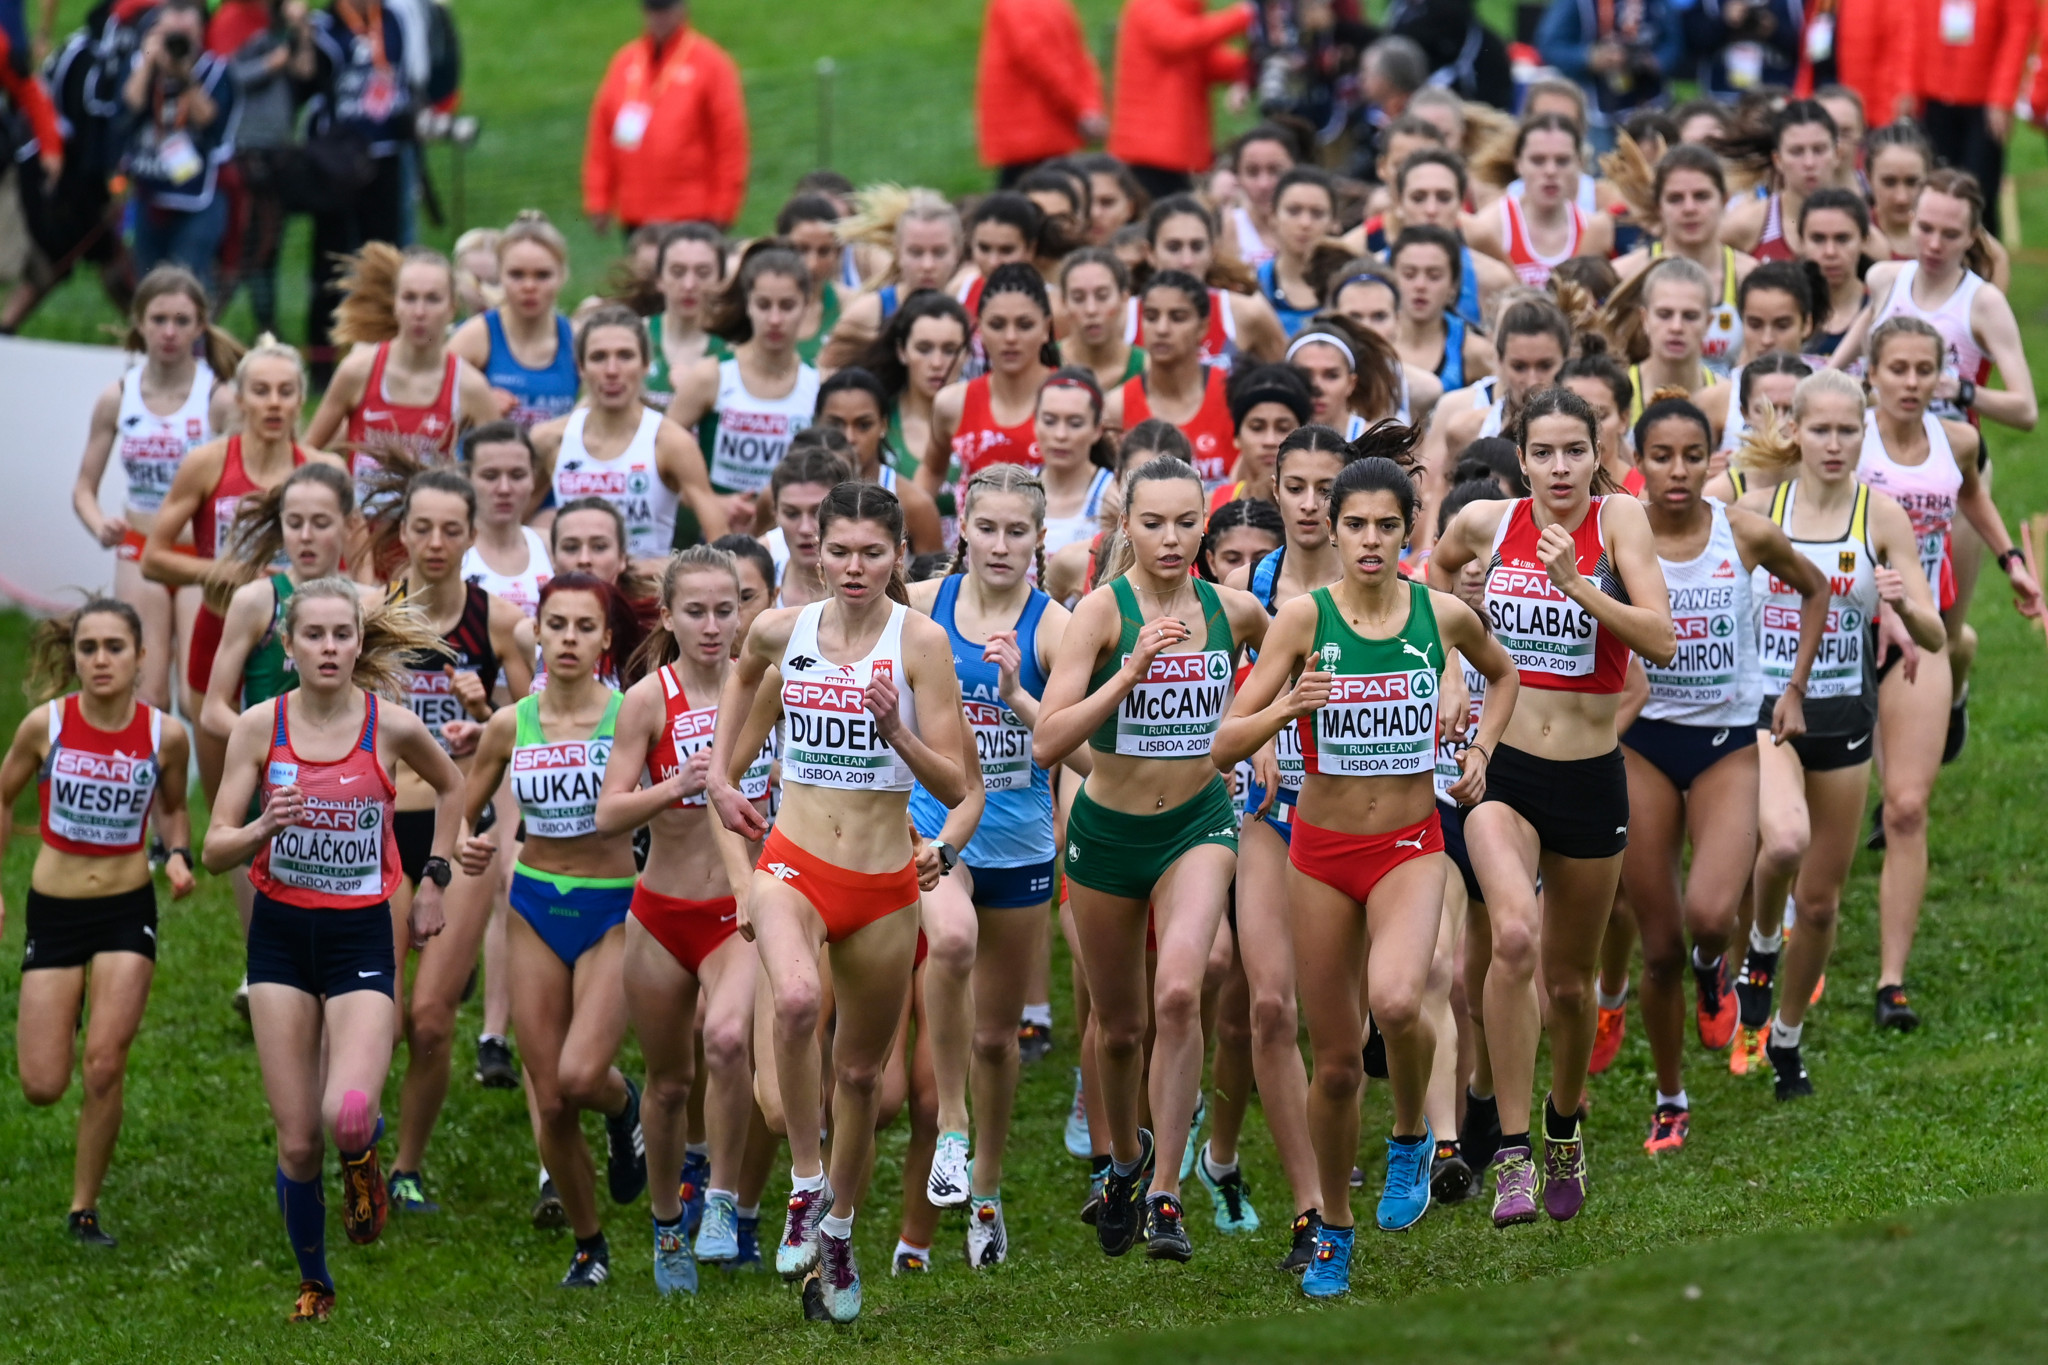 Last year's European Cross Country Championships was held in Lisbon, Portugal ©Getty Images